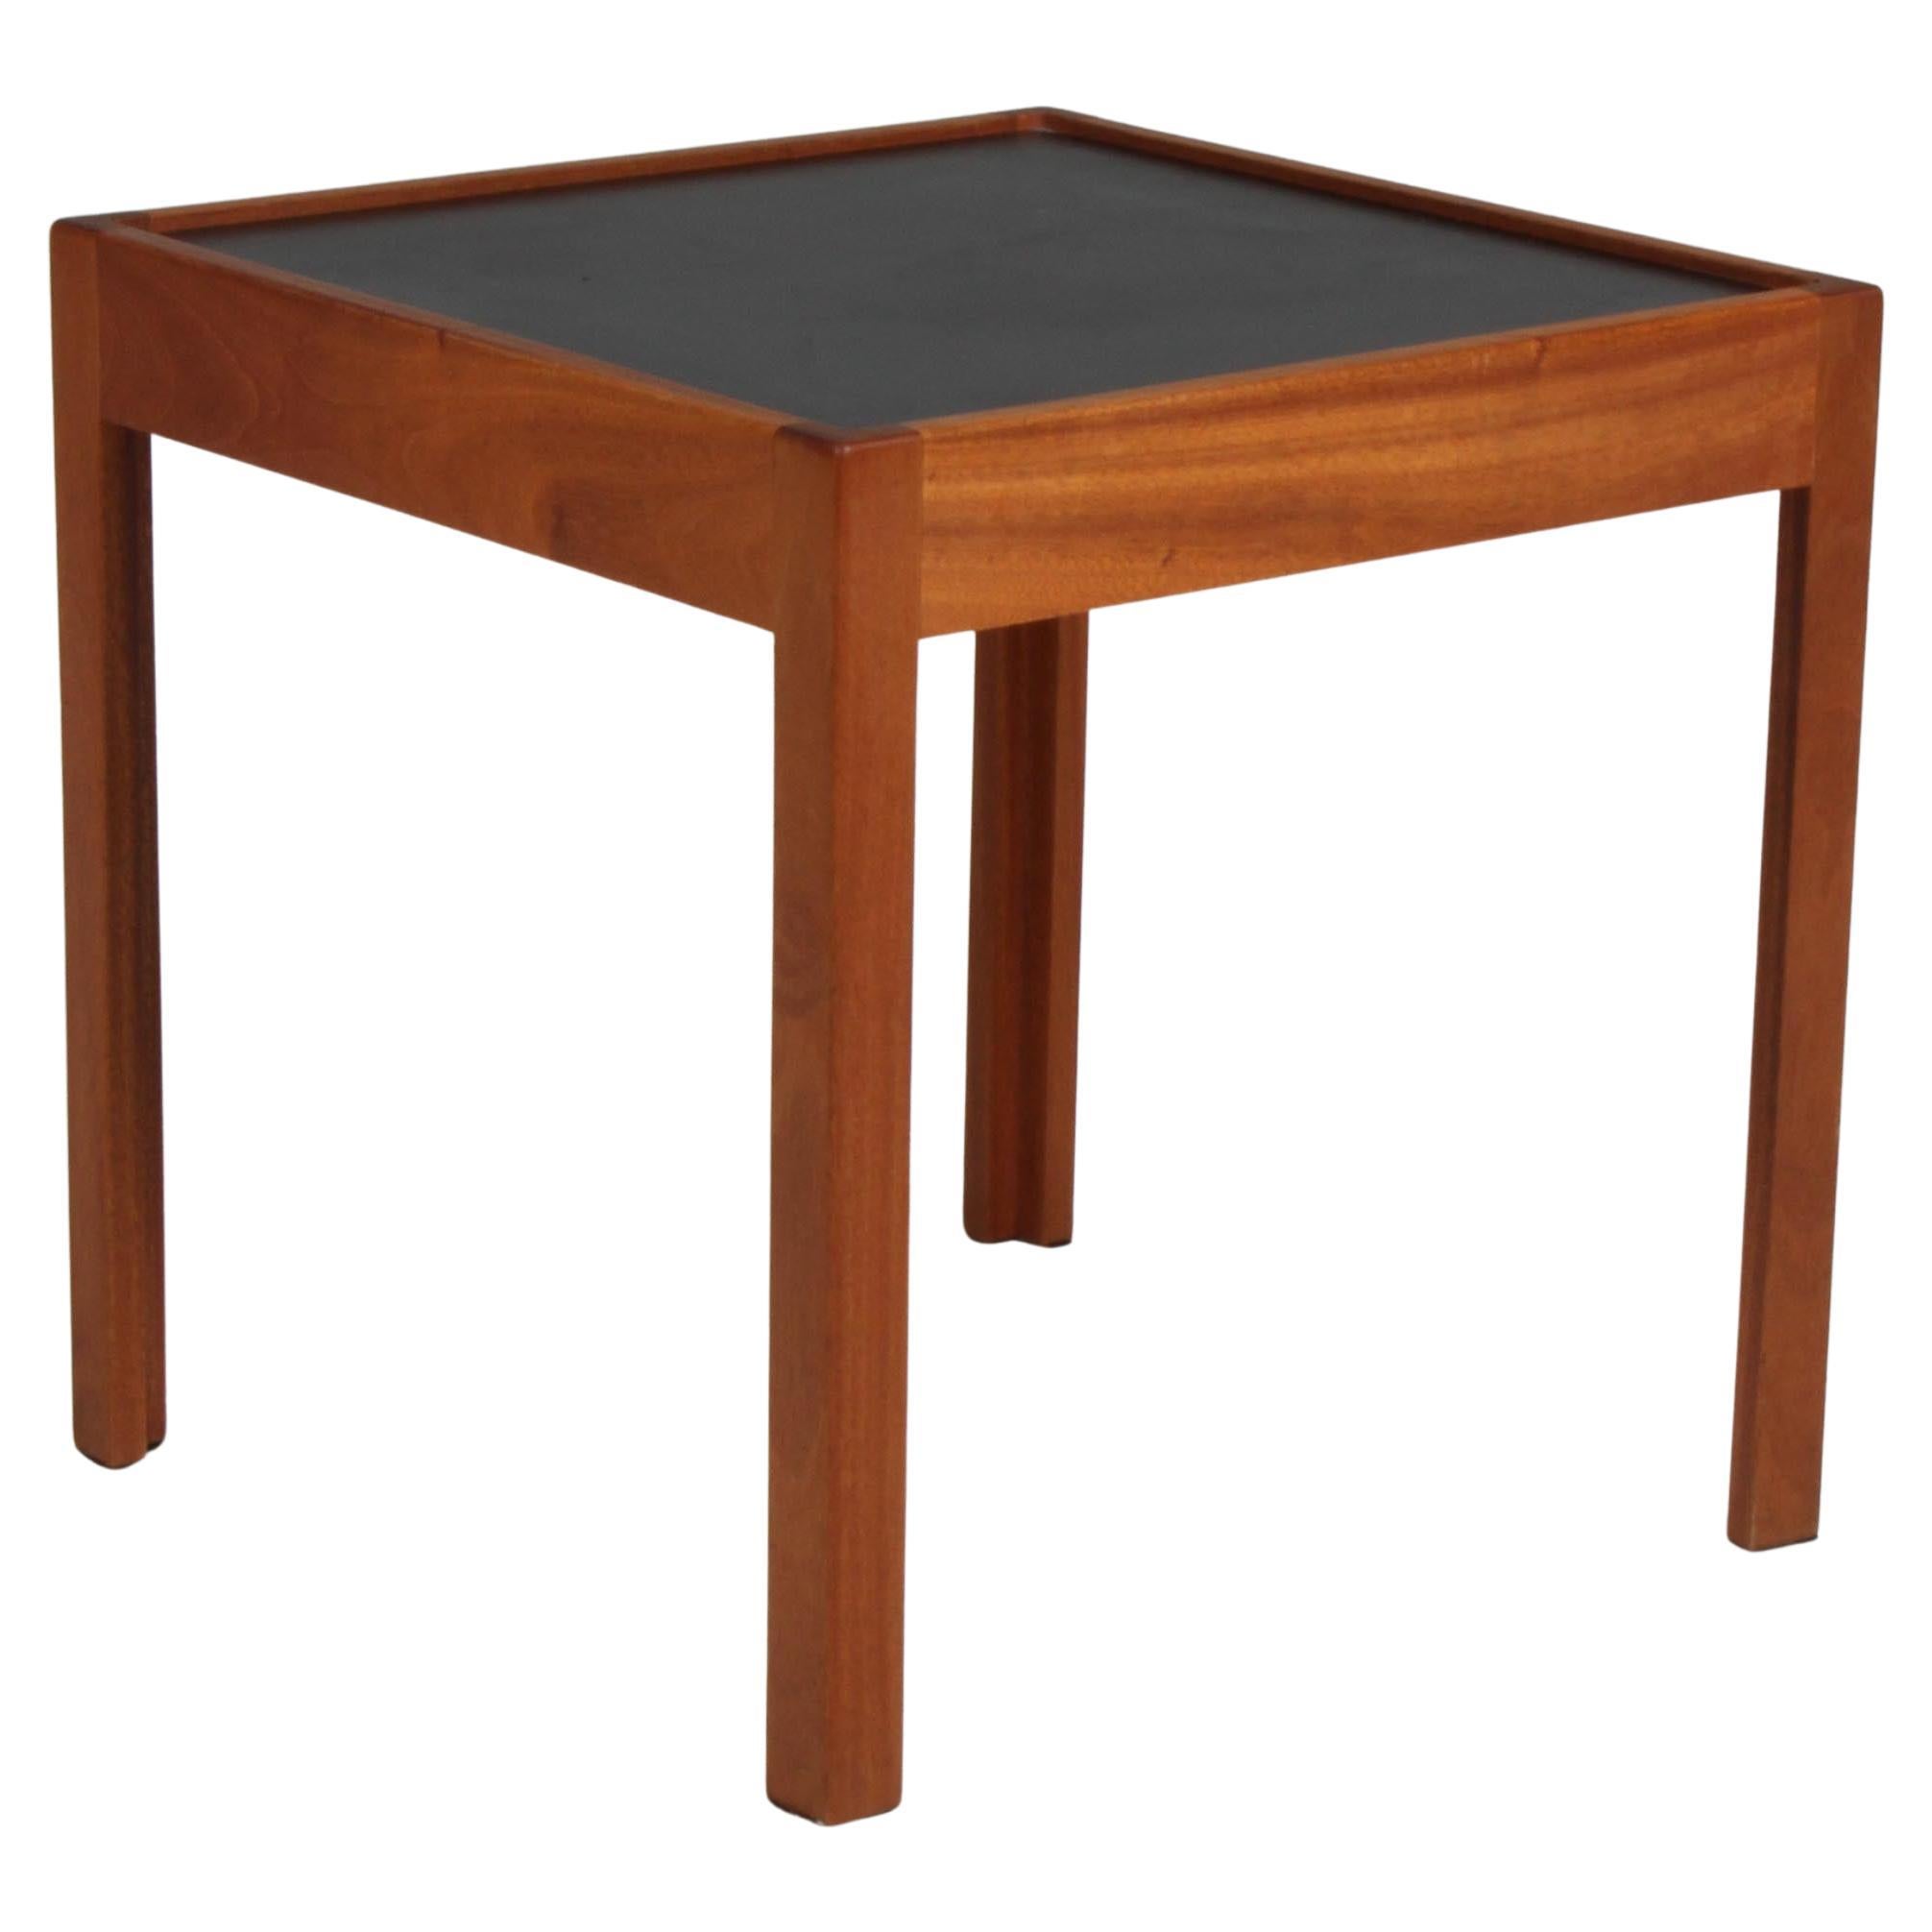 Rud Rasmussen side table of mahogany and formica, Denmark 1940s For Sale